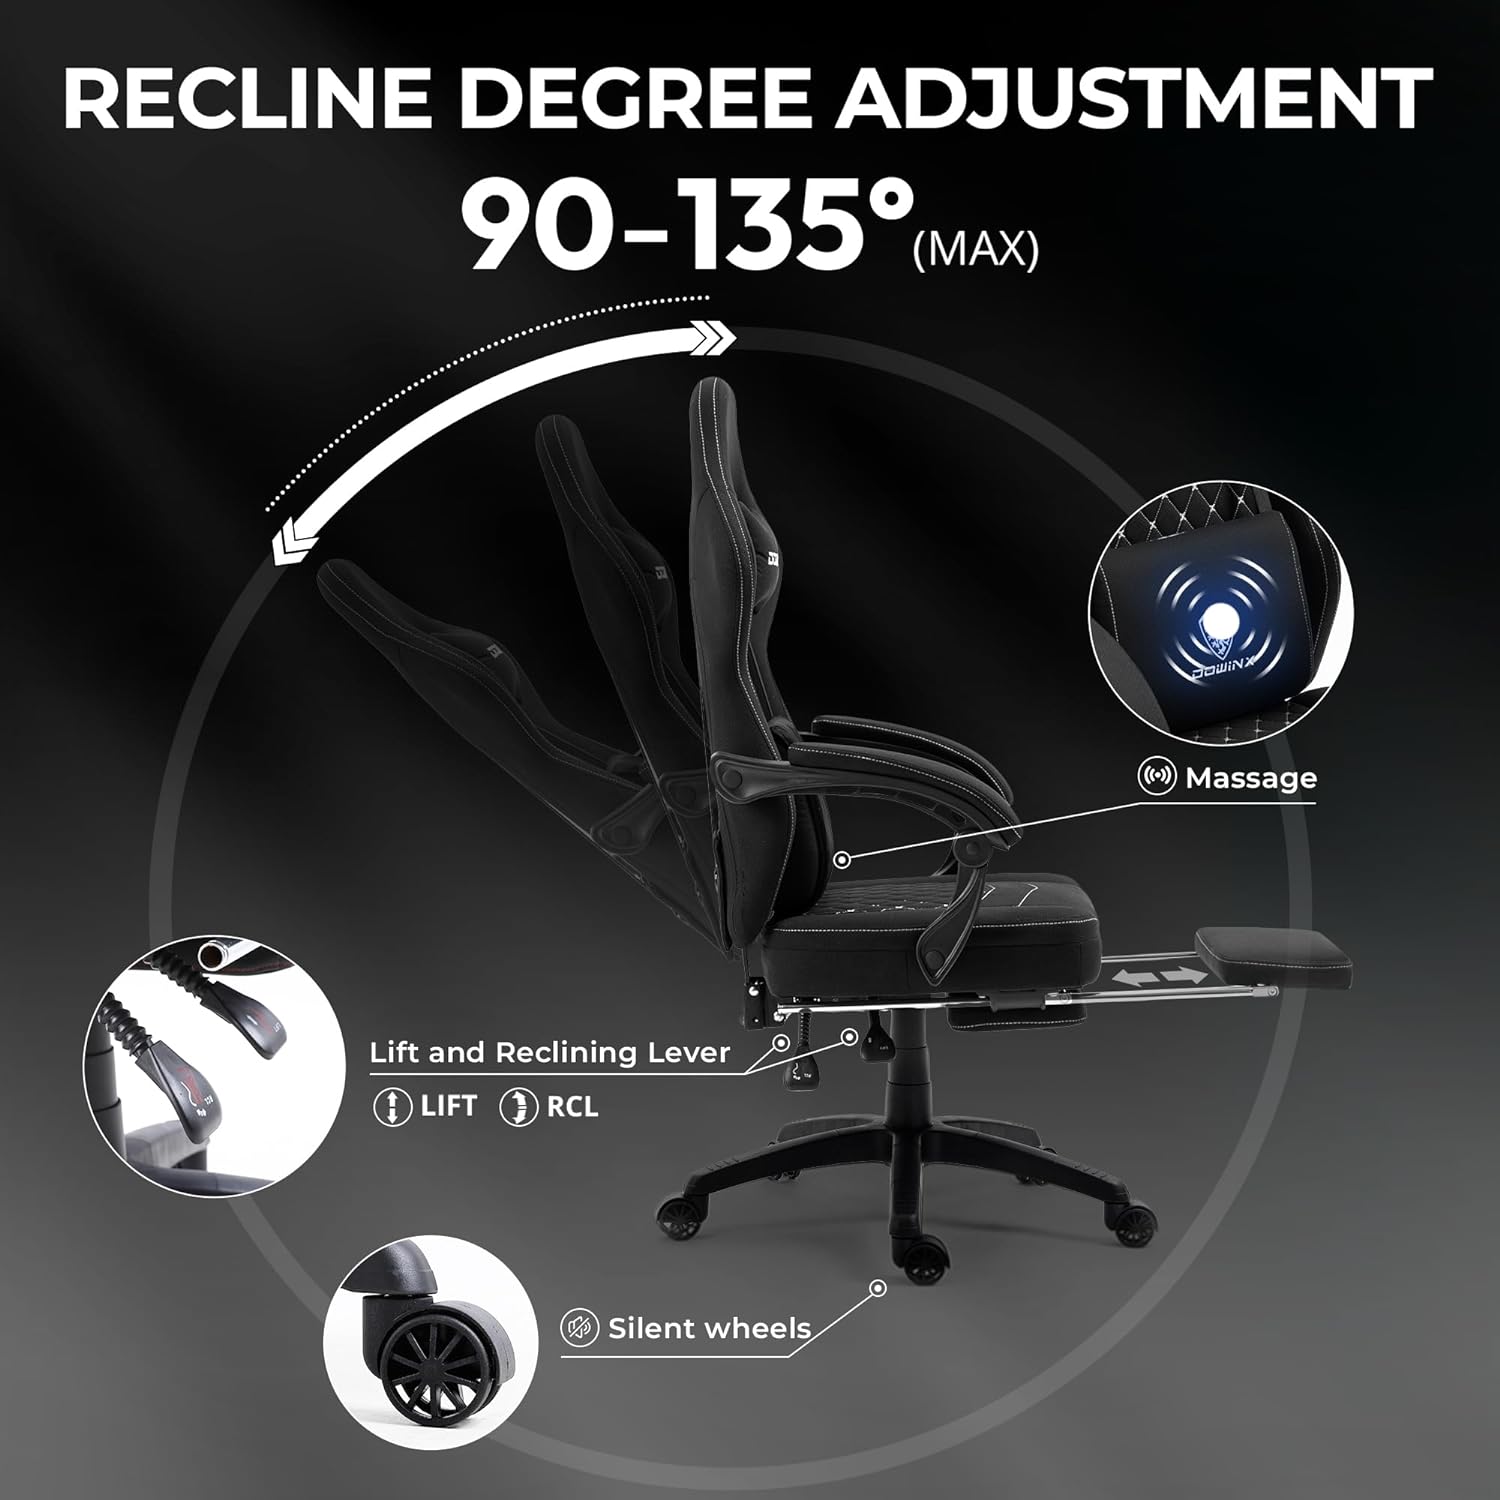 Dowinx Gaming Chair Breathable fabric, pocket spring cushion, gel pad, storage bag, massage feature, and footrest for ultimate comfort. (Black)